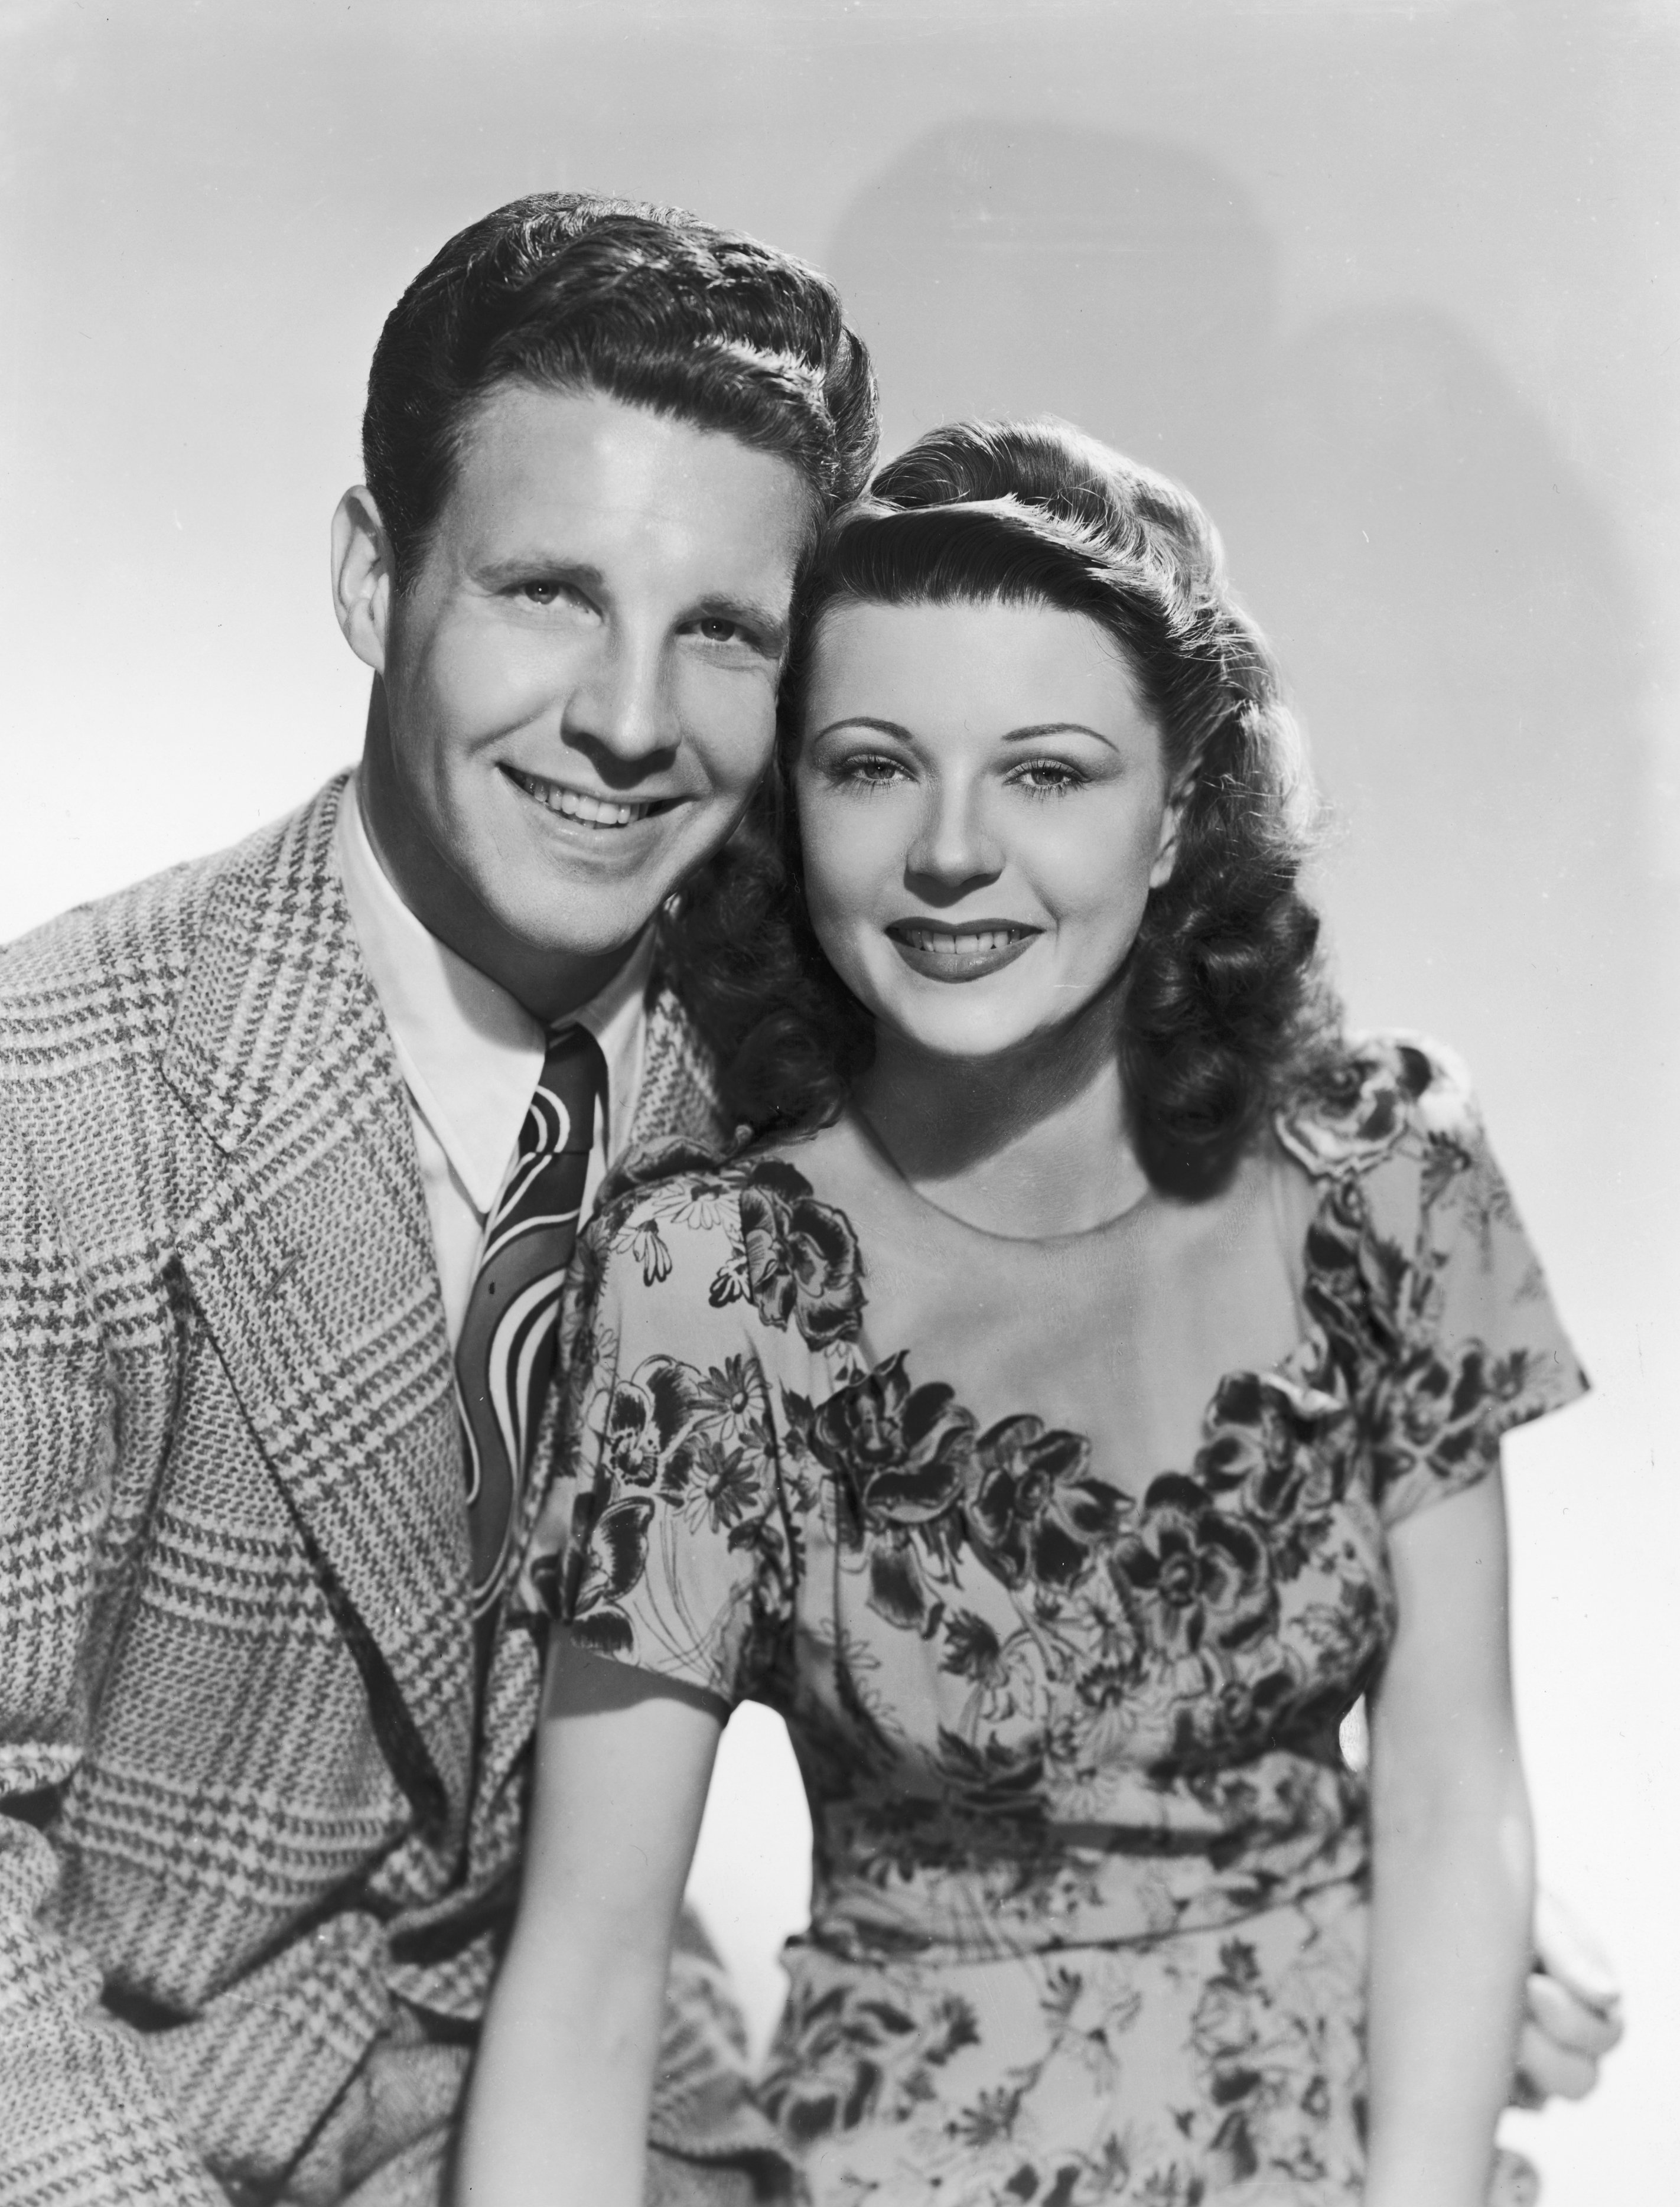 Ozzie Nelson and Harriet Hilliard in a promotional studio portrait, circa 1945. | Source: Hulton Archive/Getty Images